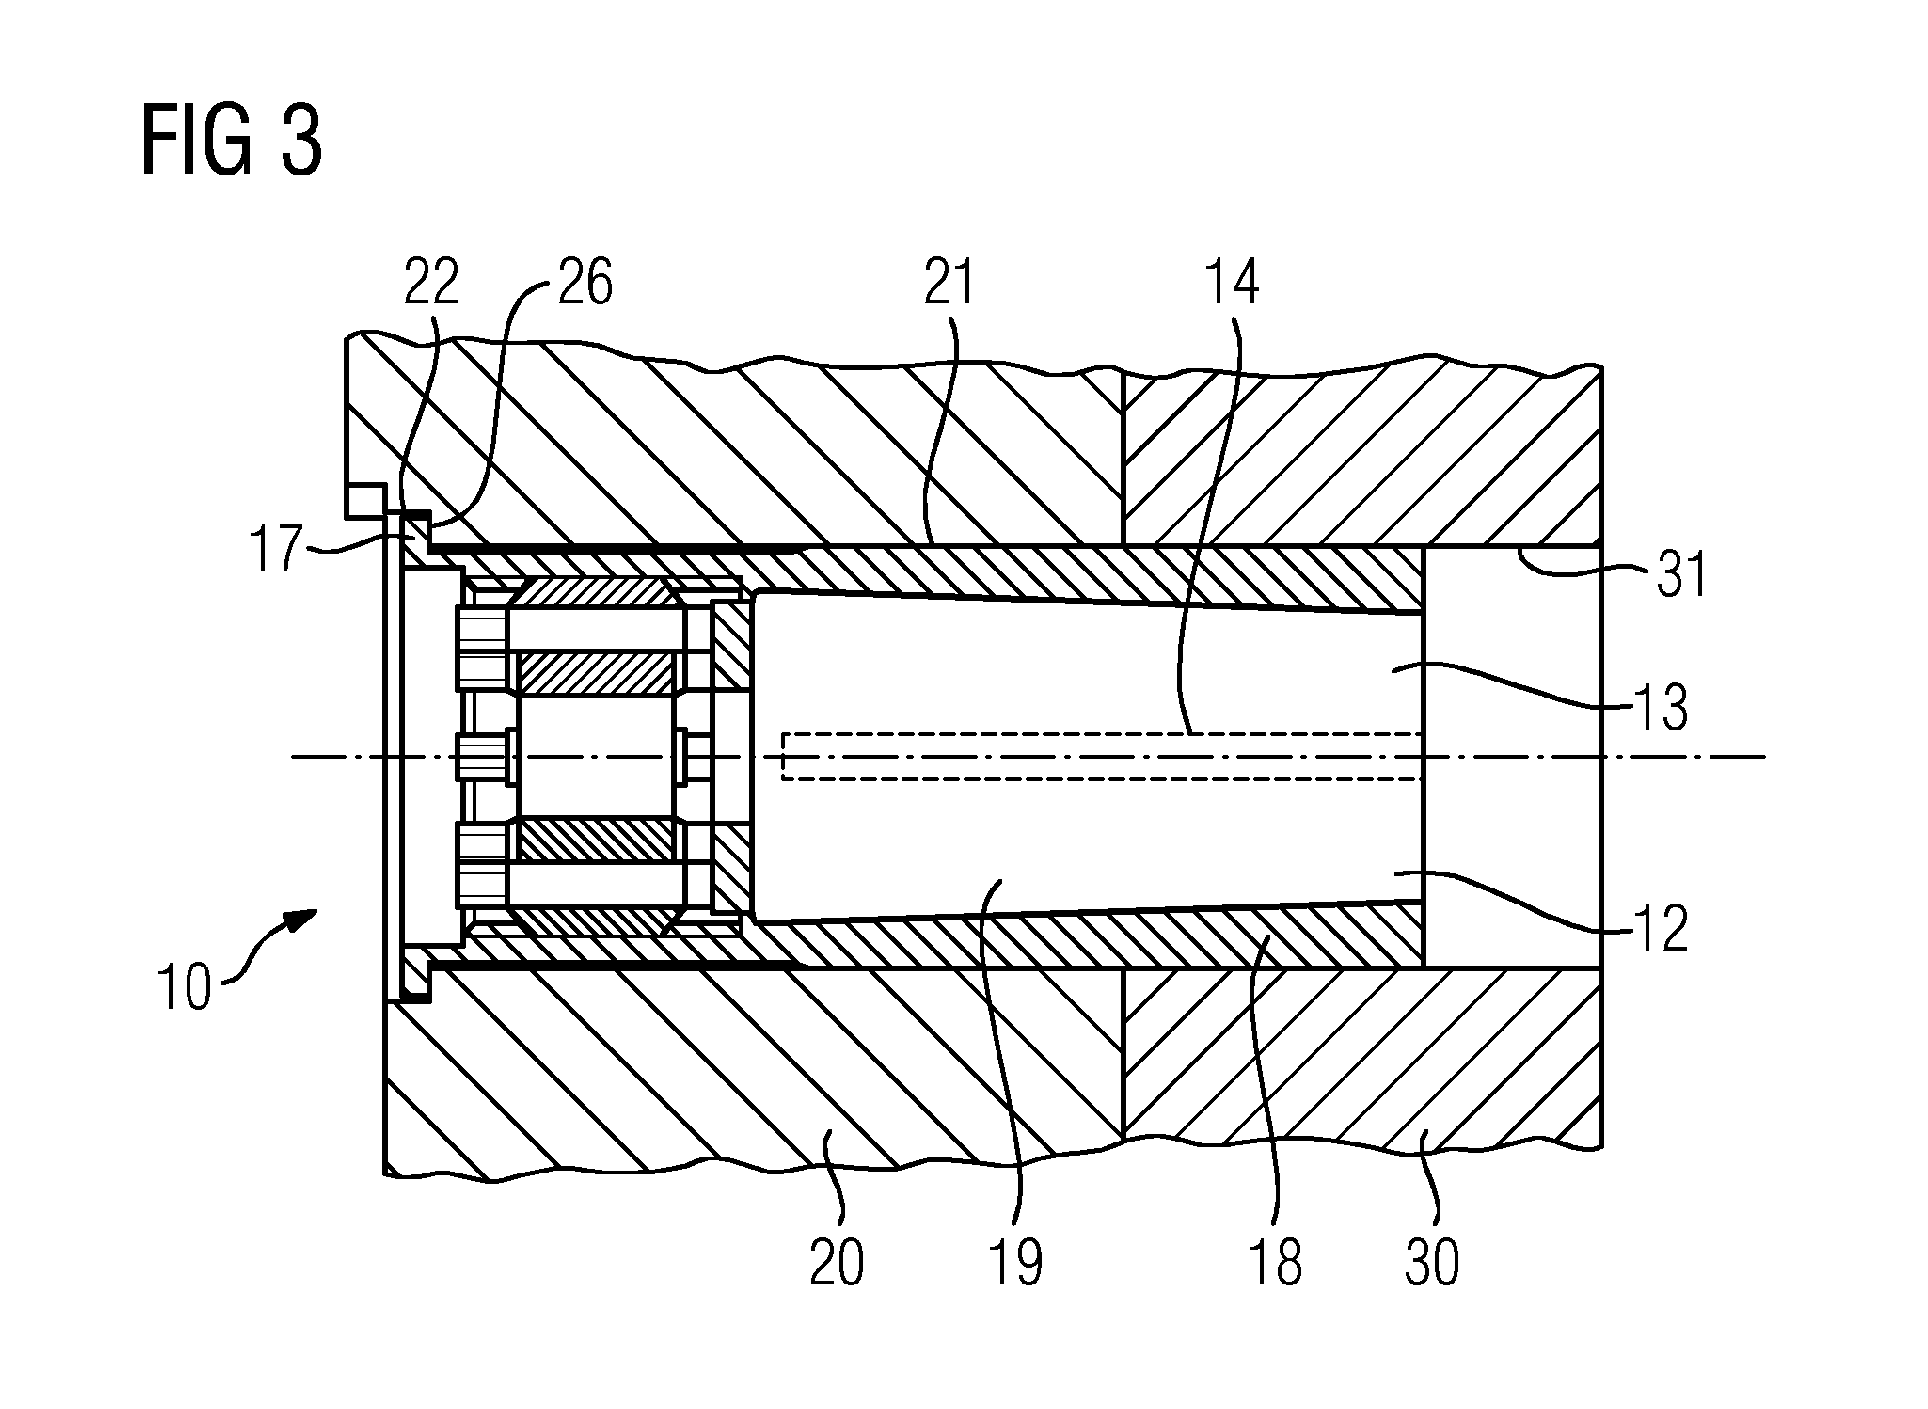 Coupling device for connecting a clutch to a turbine train